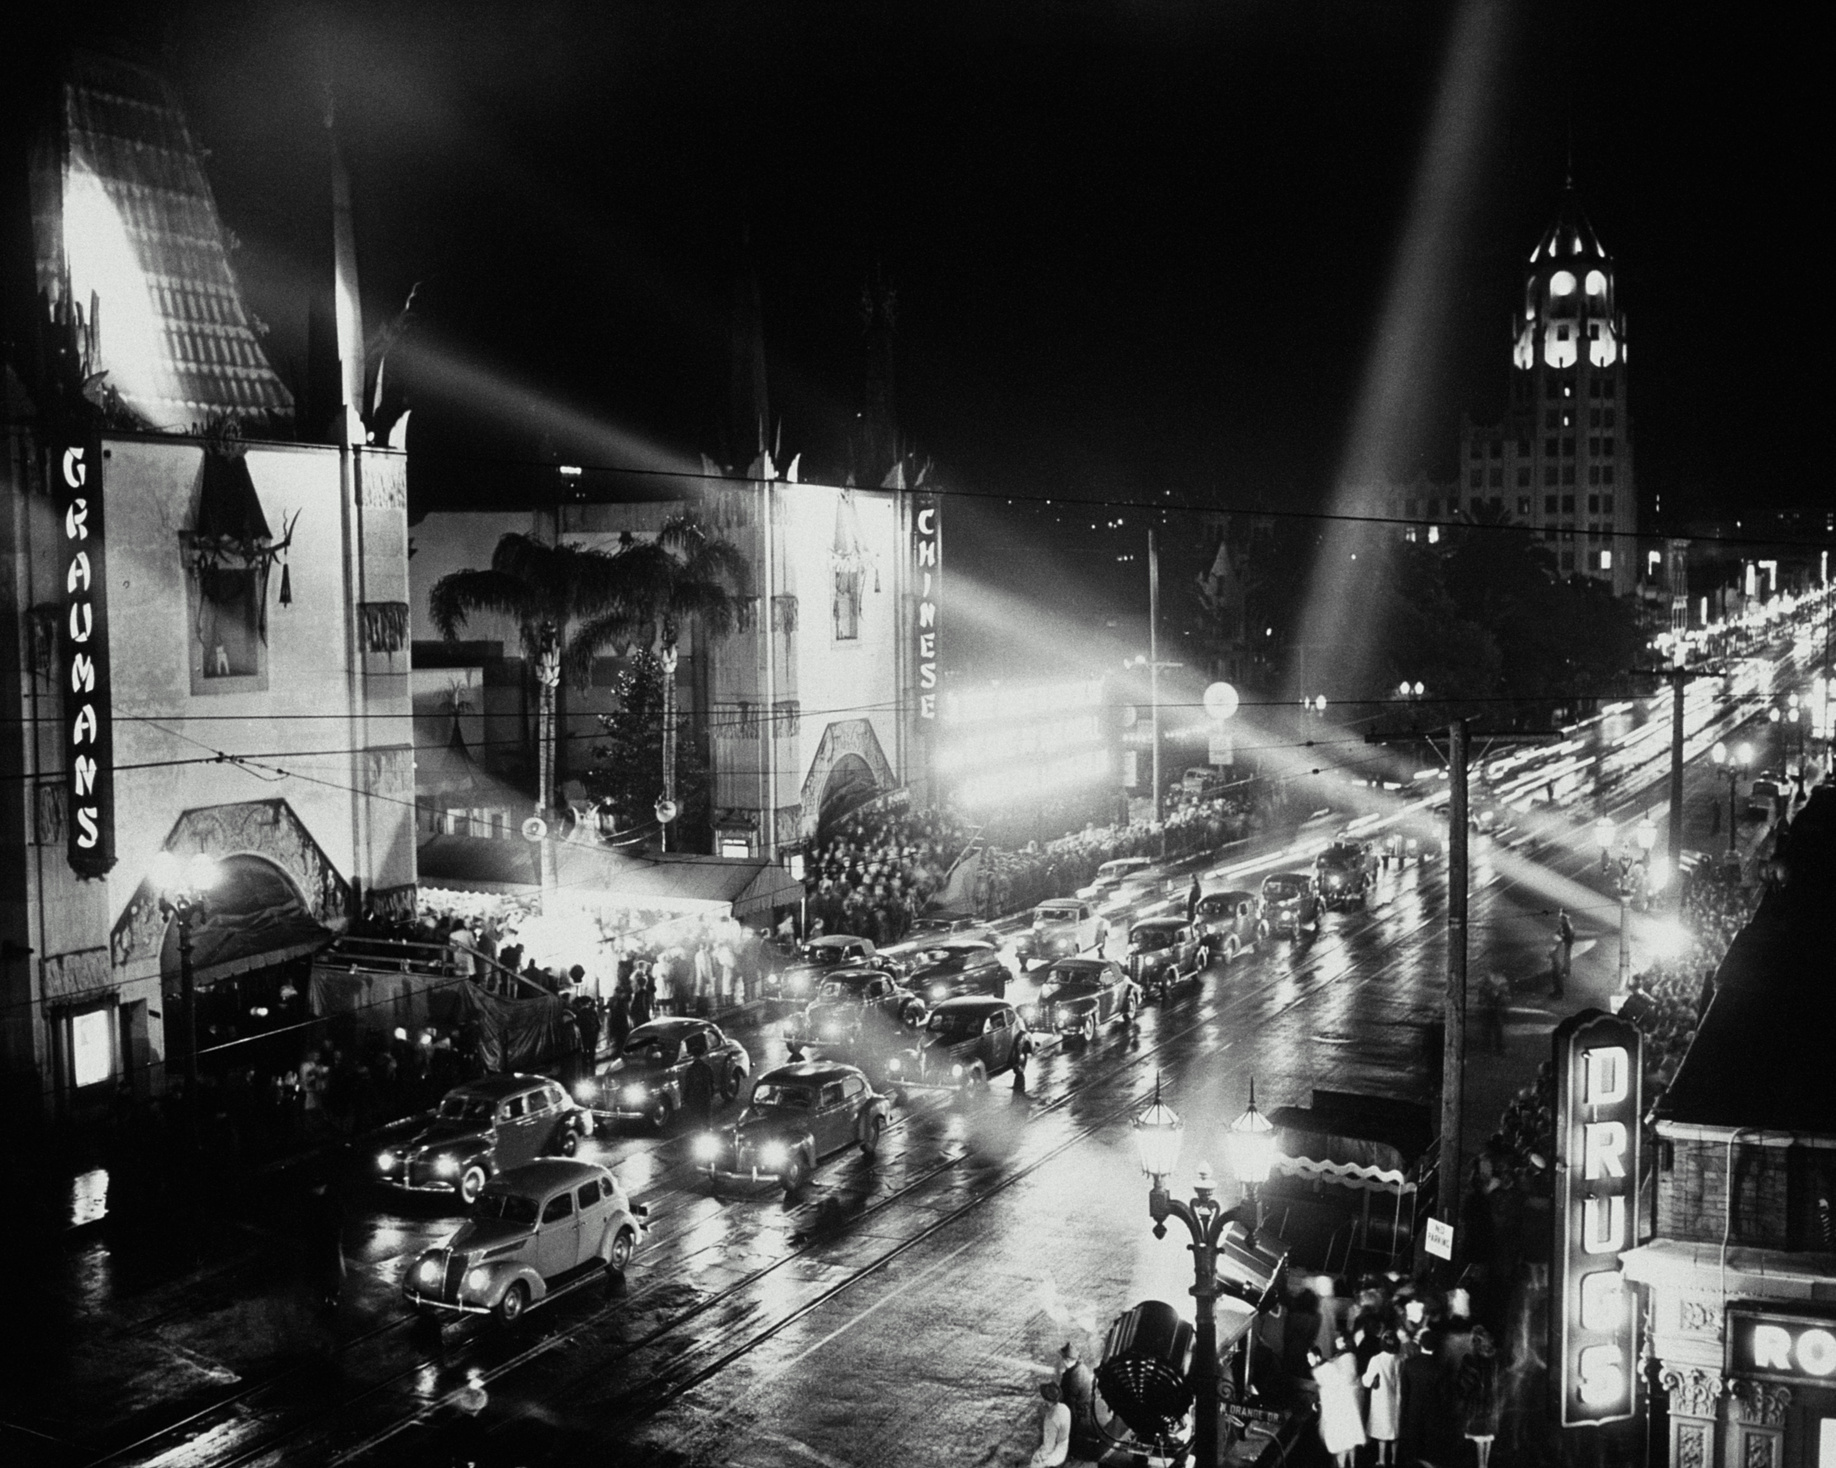 1940S MOVIE PREMIERE, HOLLYWOOD, CALIFORNIA